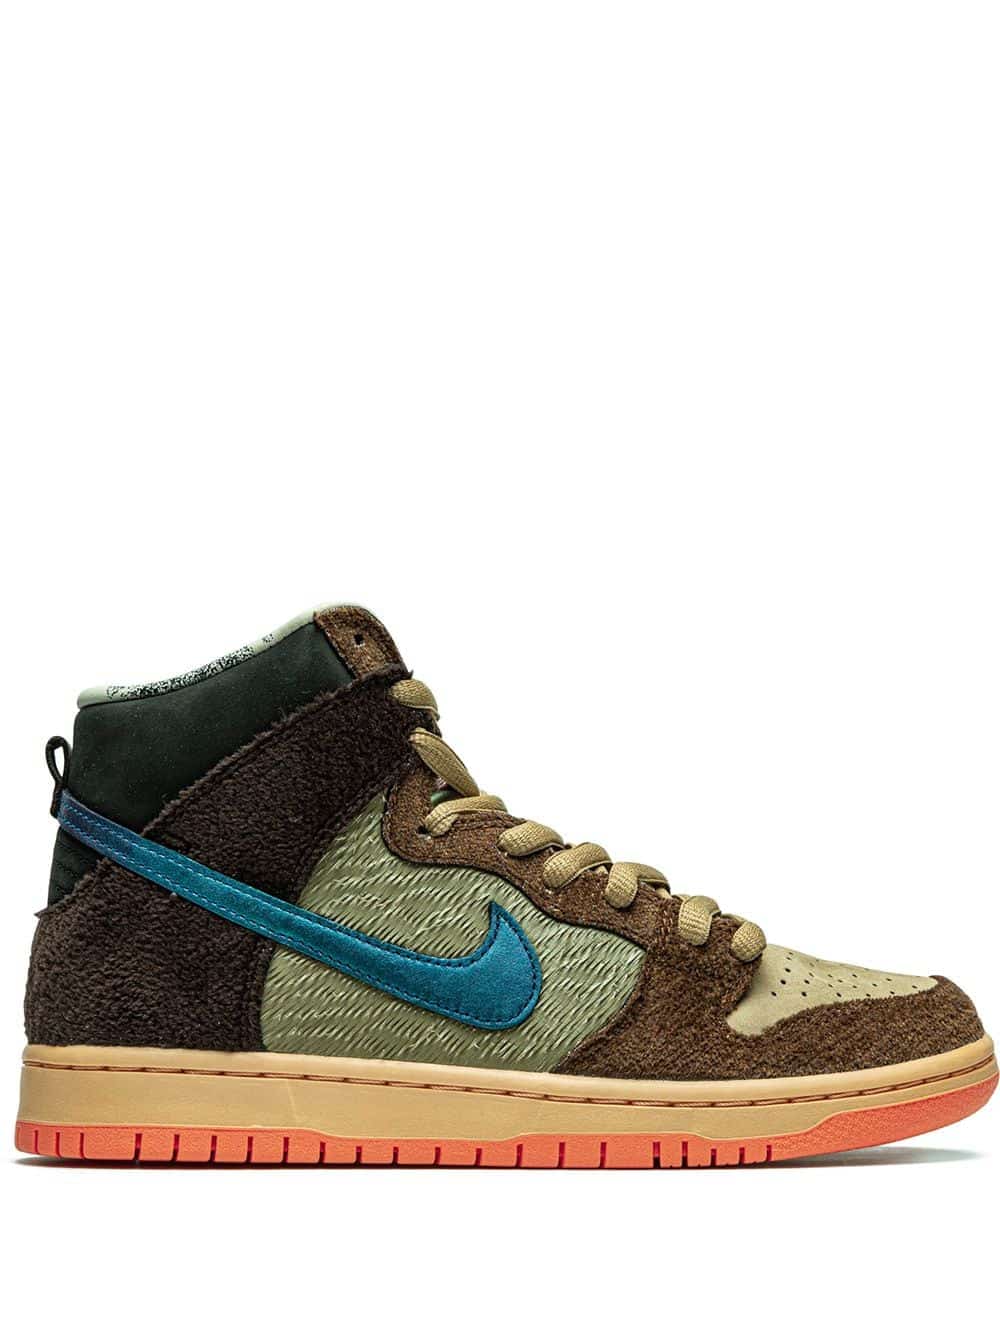 Nike x Concepts SB Dunk High sneakers - Bruin